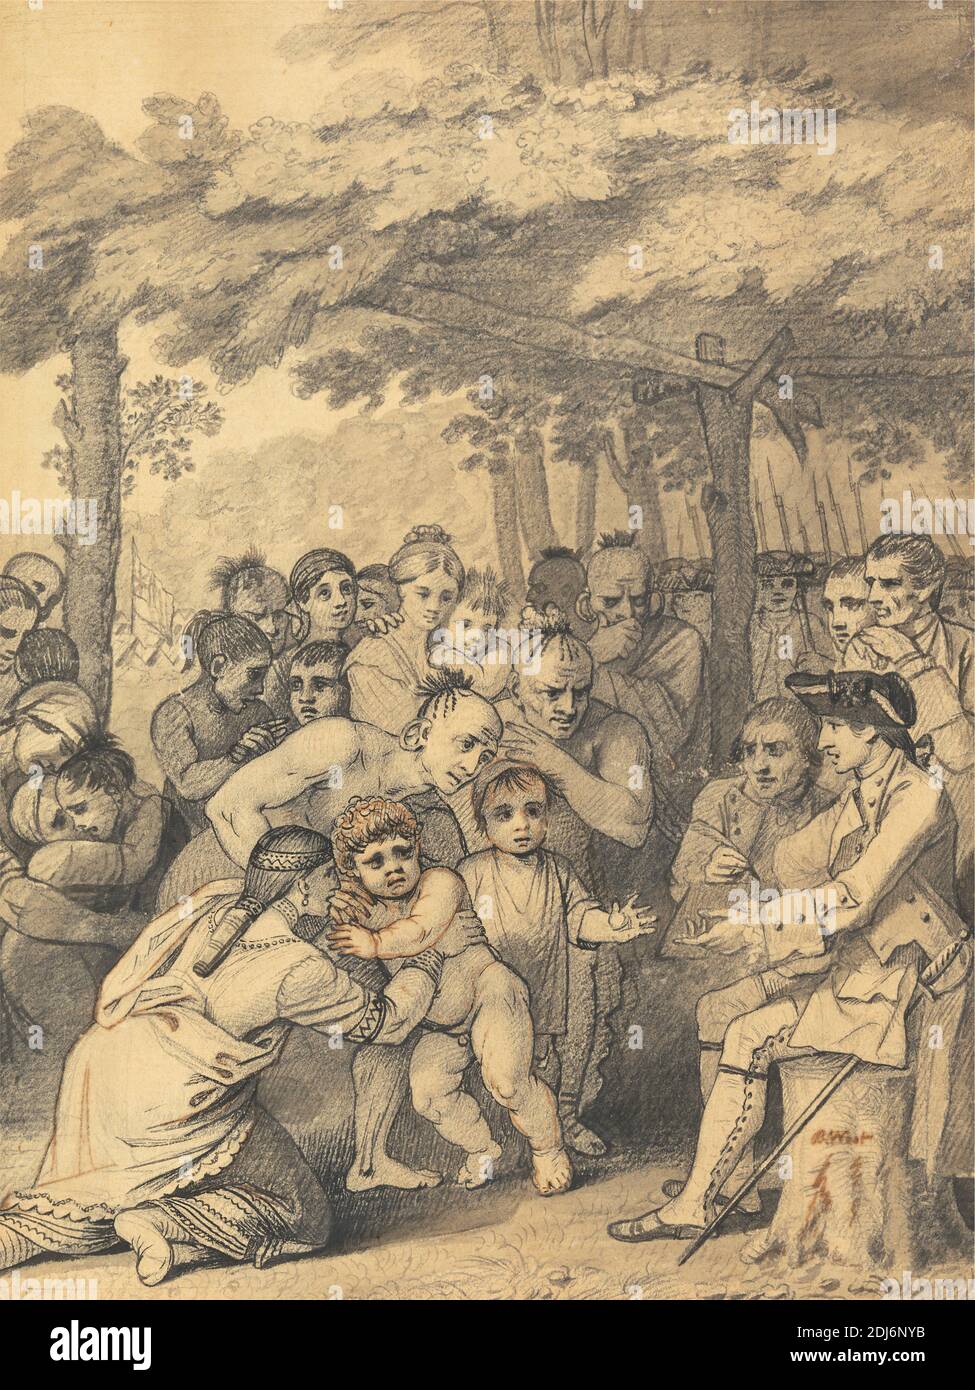 The Indians Delivering up the English Captives to Colonel Bouquet near his camp at the folks of Muskingum in North America in November 1764, 1765, Benjamin West, 1738–1820, American, active in Britain (from 1763), between 1765 and 1766, Graphite, with pen in black and brown ink, with rubbing and shading on medium, slightly textured, bege laid paper, Sheet: 10 1/8 x 8 1/4 inches (25.7 x 21 cm) and Image: 8 1/8 x 6 3/16 inches (20.6 x 15.7 cm), camp (temporary settlement), captives, children, colonel, colonist, costume, earrings, families, fear, flag, hats, Indians, men, military art, mother Stock Photo